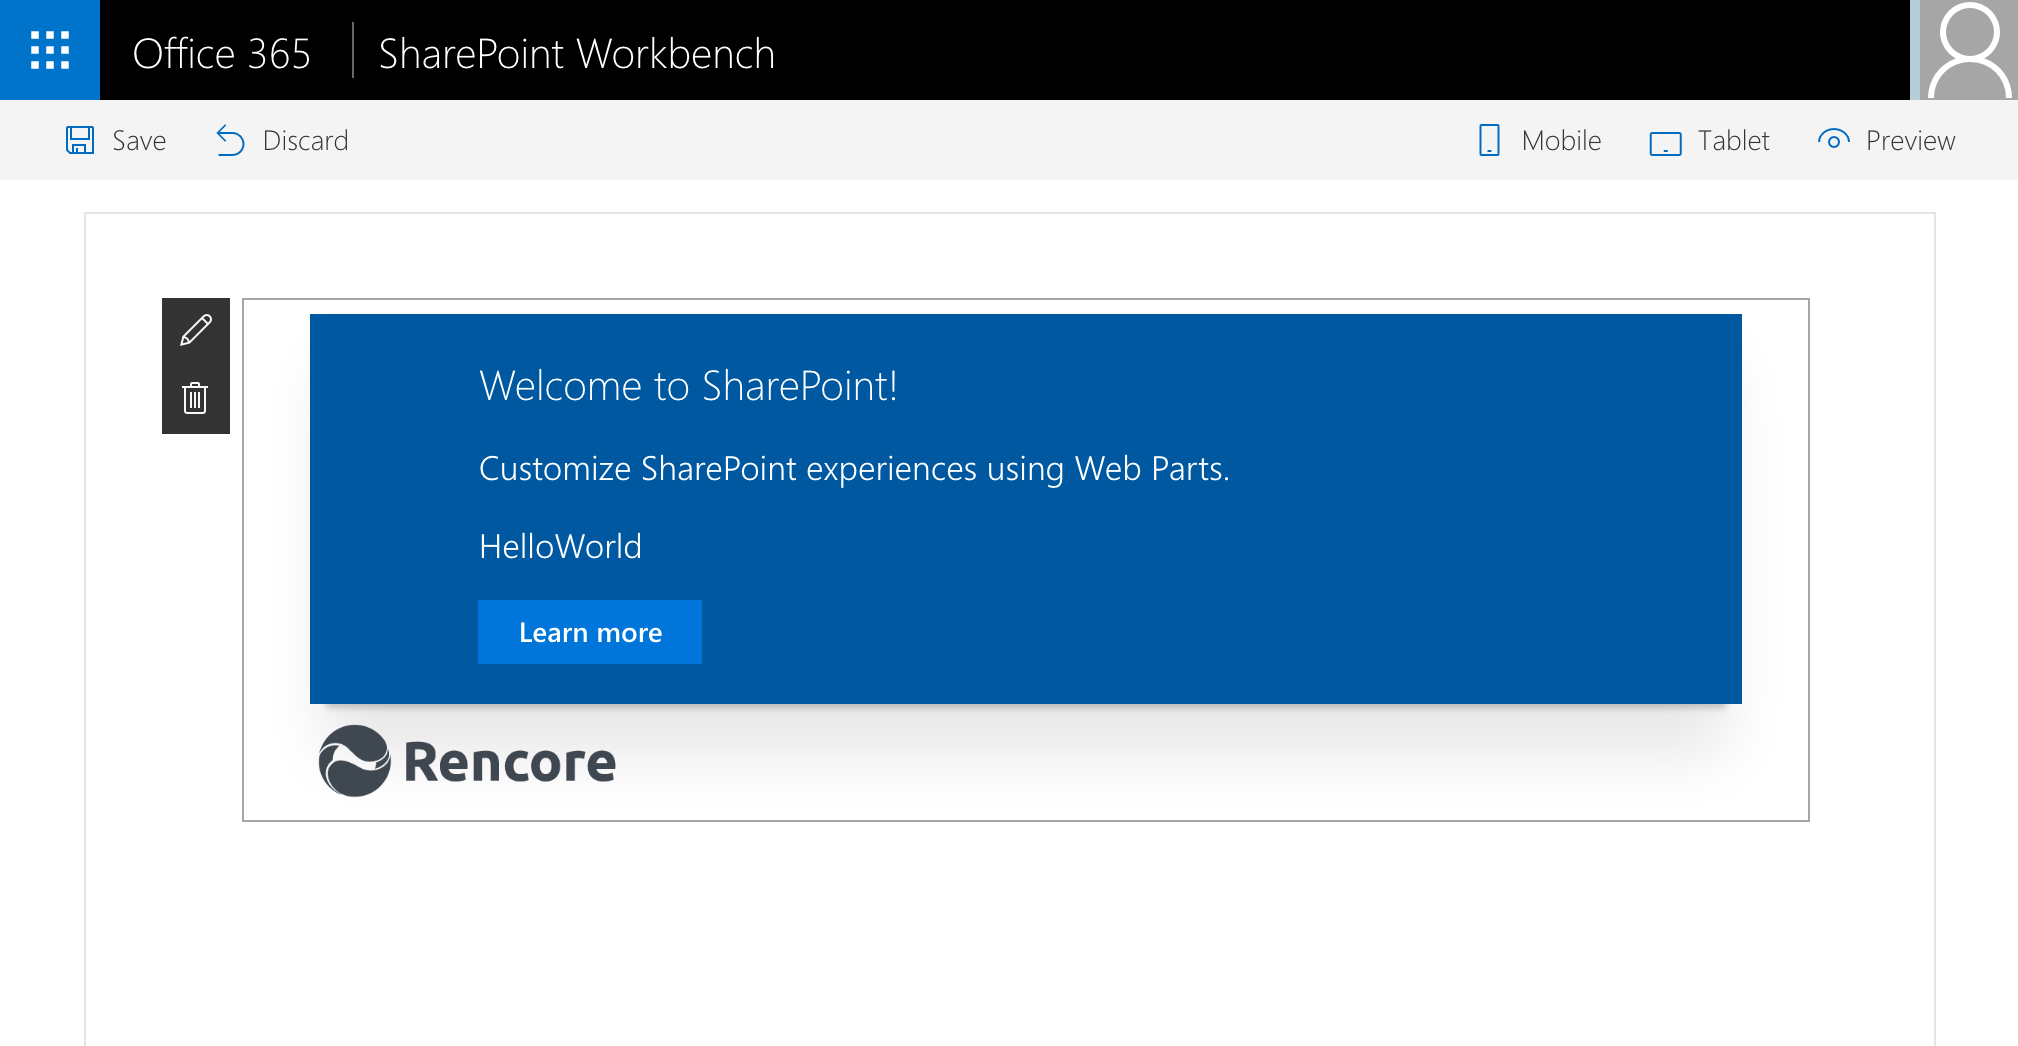 SharePoint Framework client-side web part showing Rencore logo